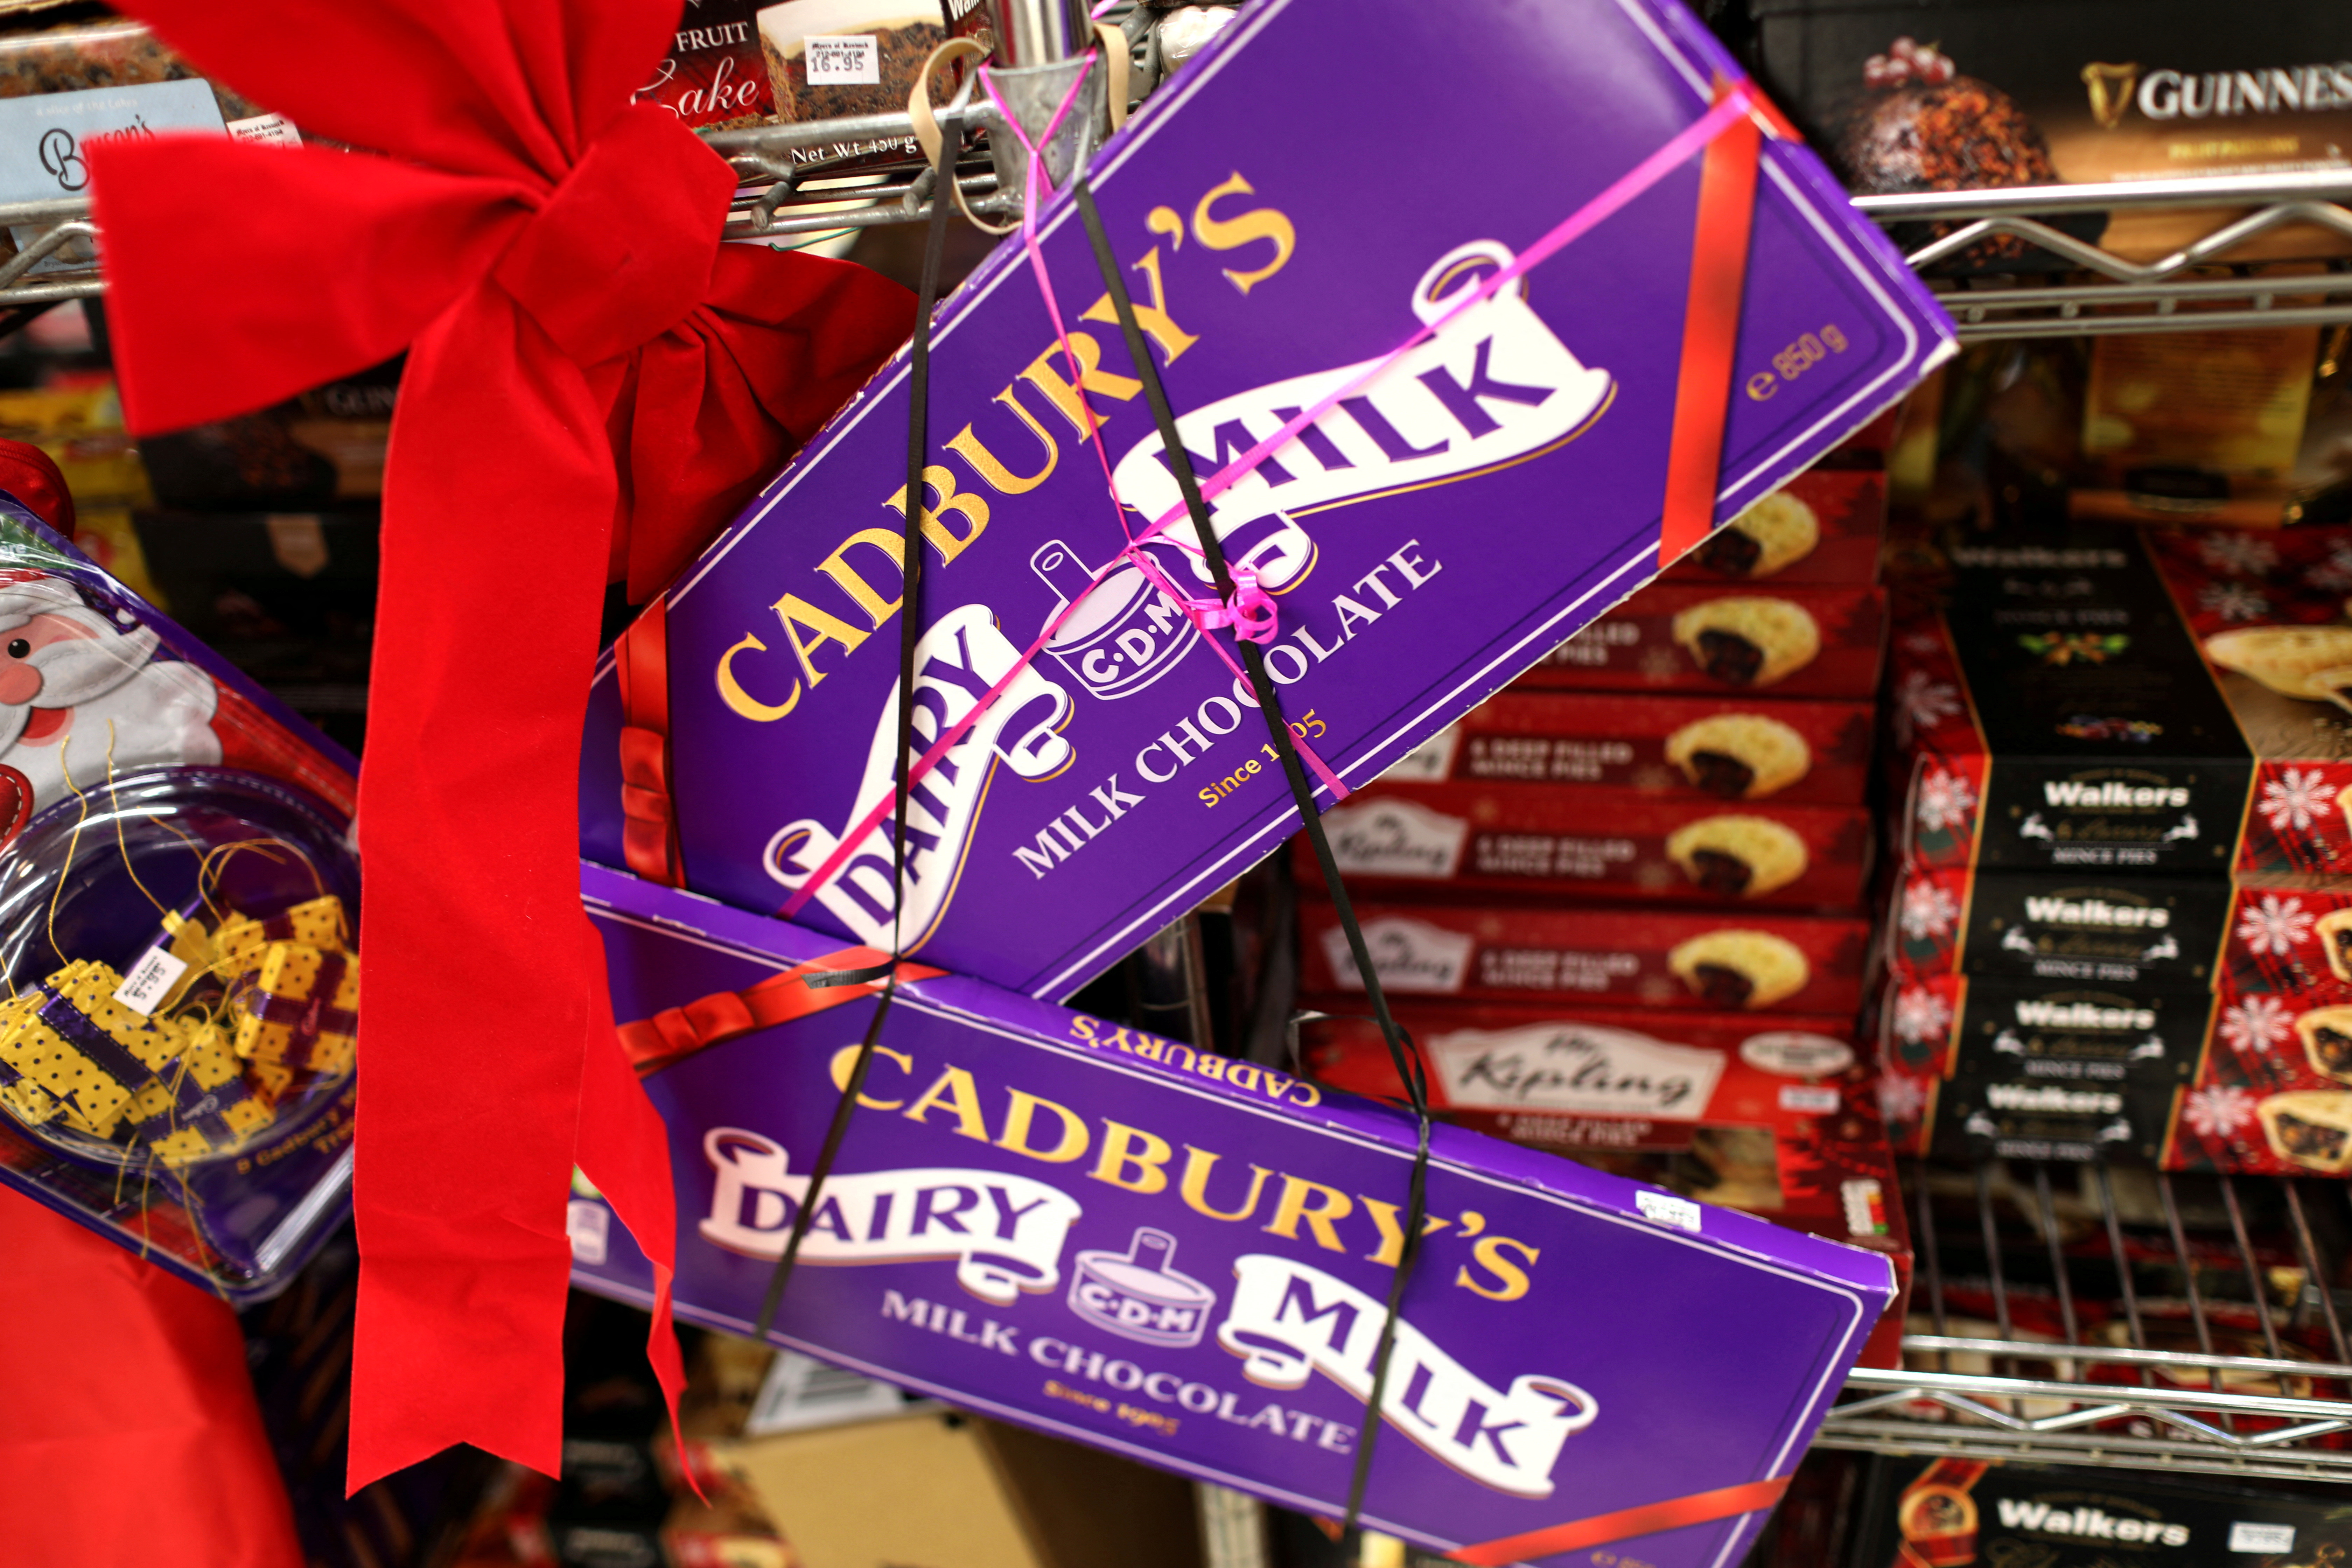 Cadbury chocolates are seen on display at British themed shop Myers of Keswick in Manhattan in New York